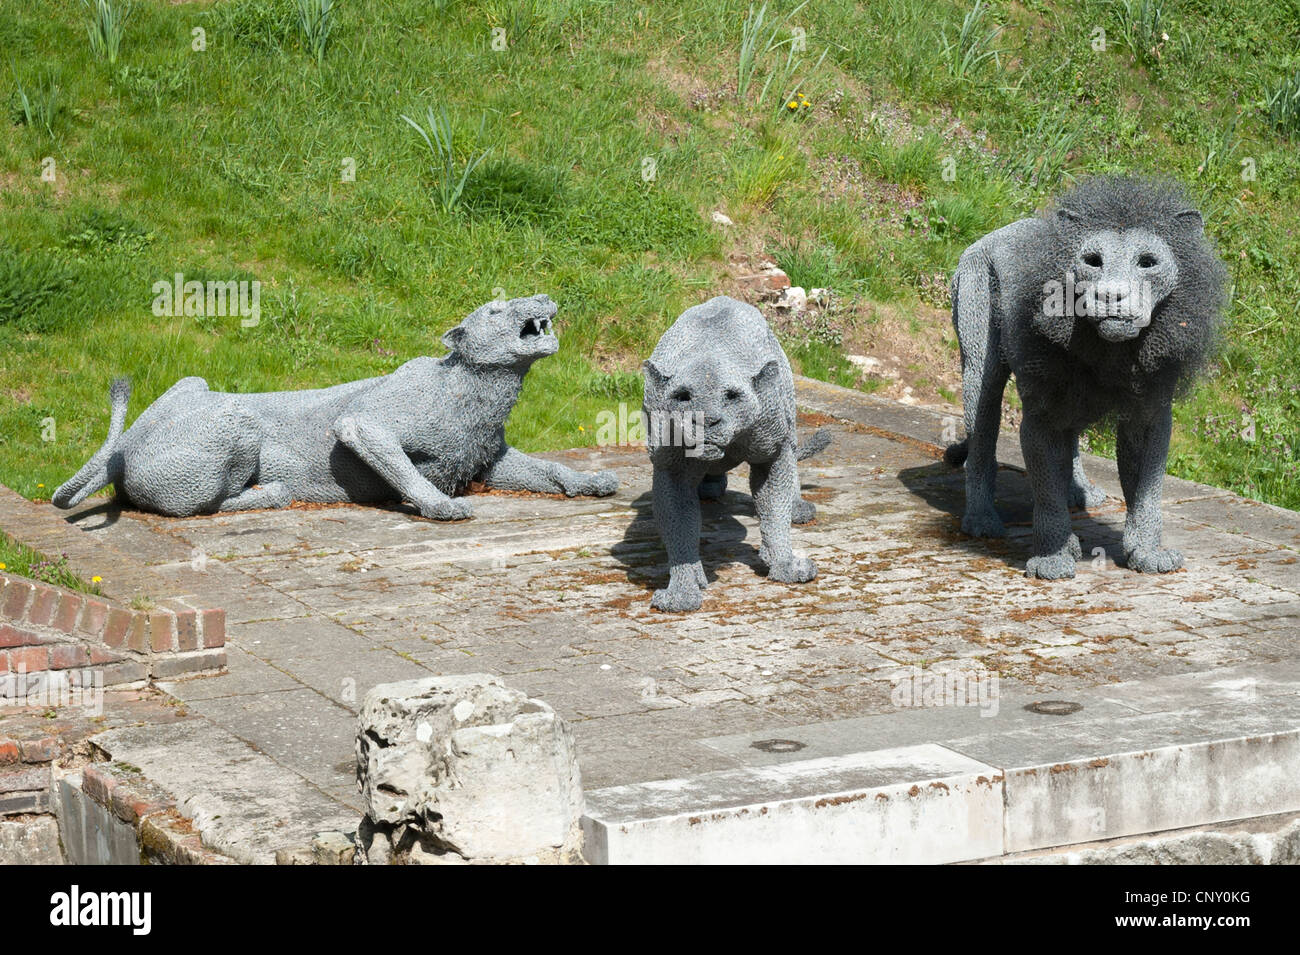 Tower of London galvanized wire mesh lions by Kendra Haste 2010 to commemorate the Royal Menagerie 1255 to 1835 then London Zoo Stock Photo